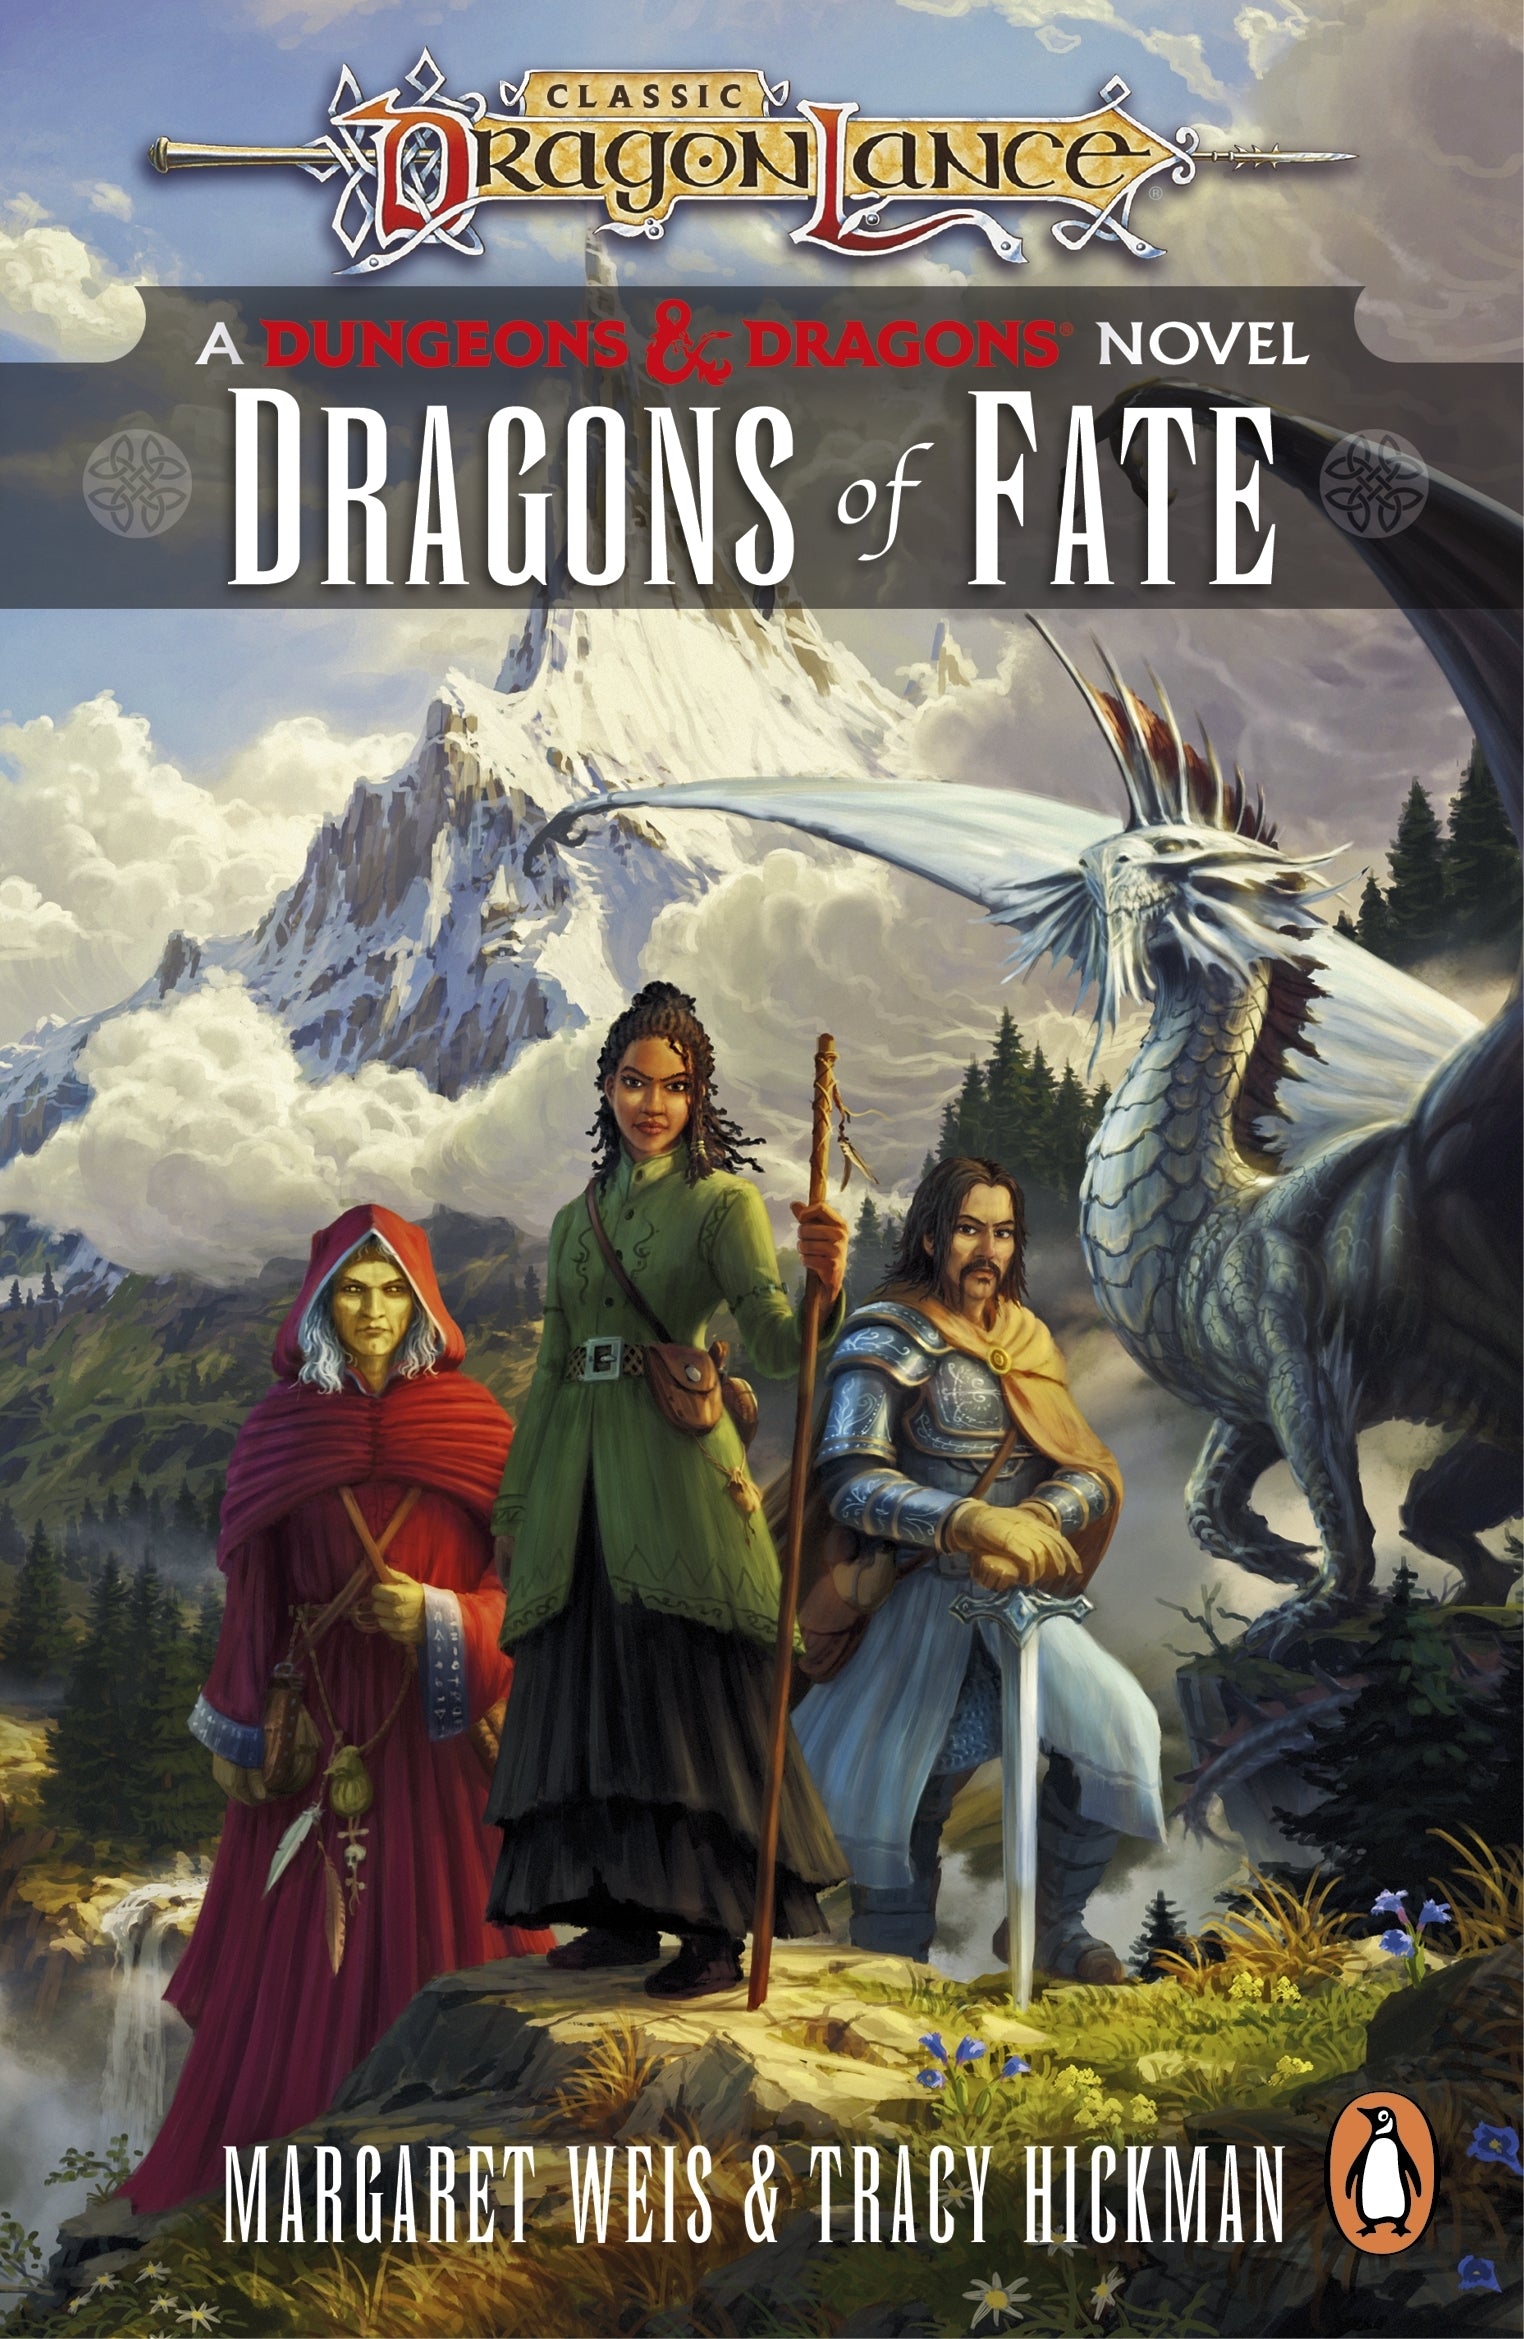 Dragons of Fate- D&D Dragonlance